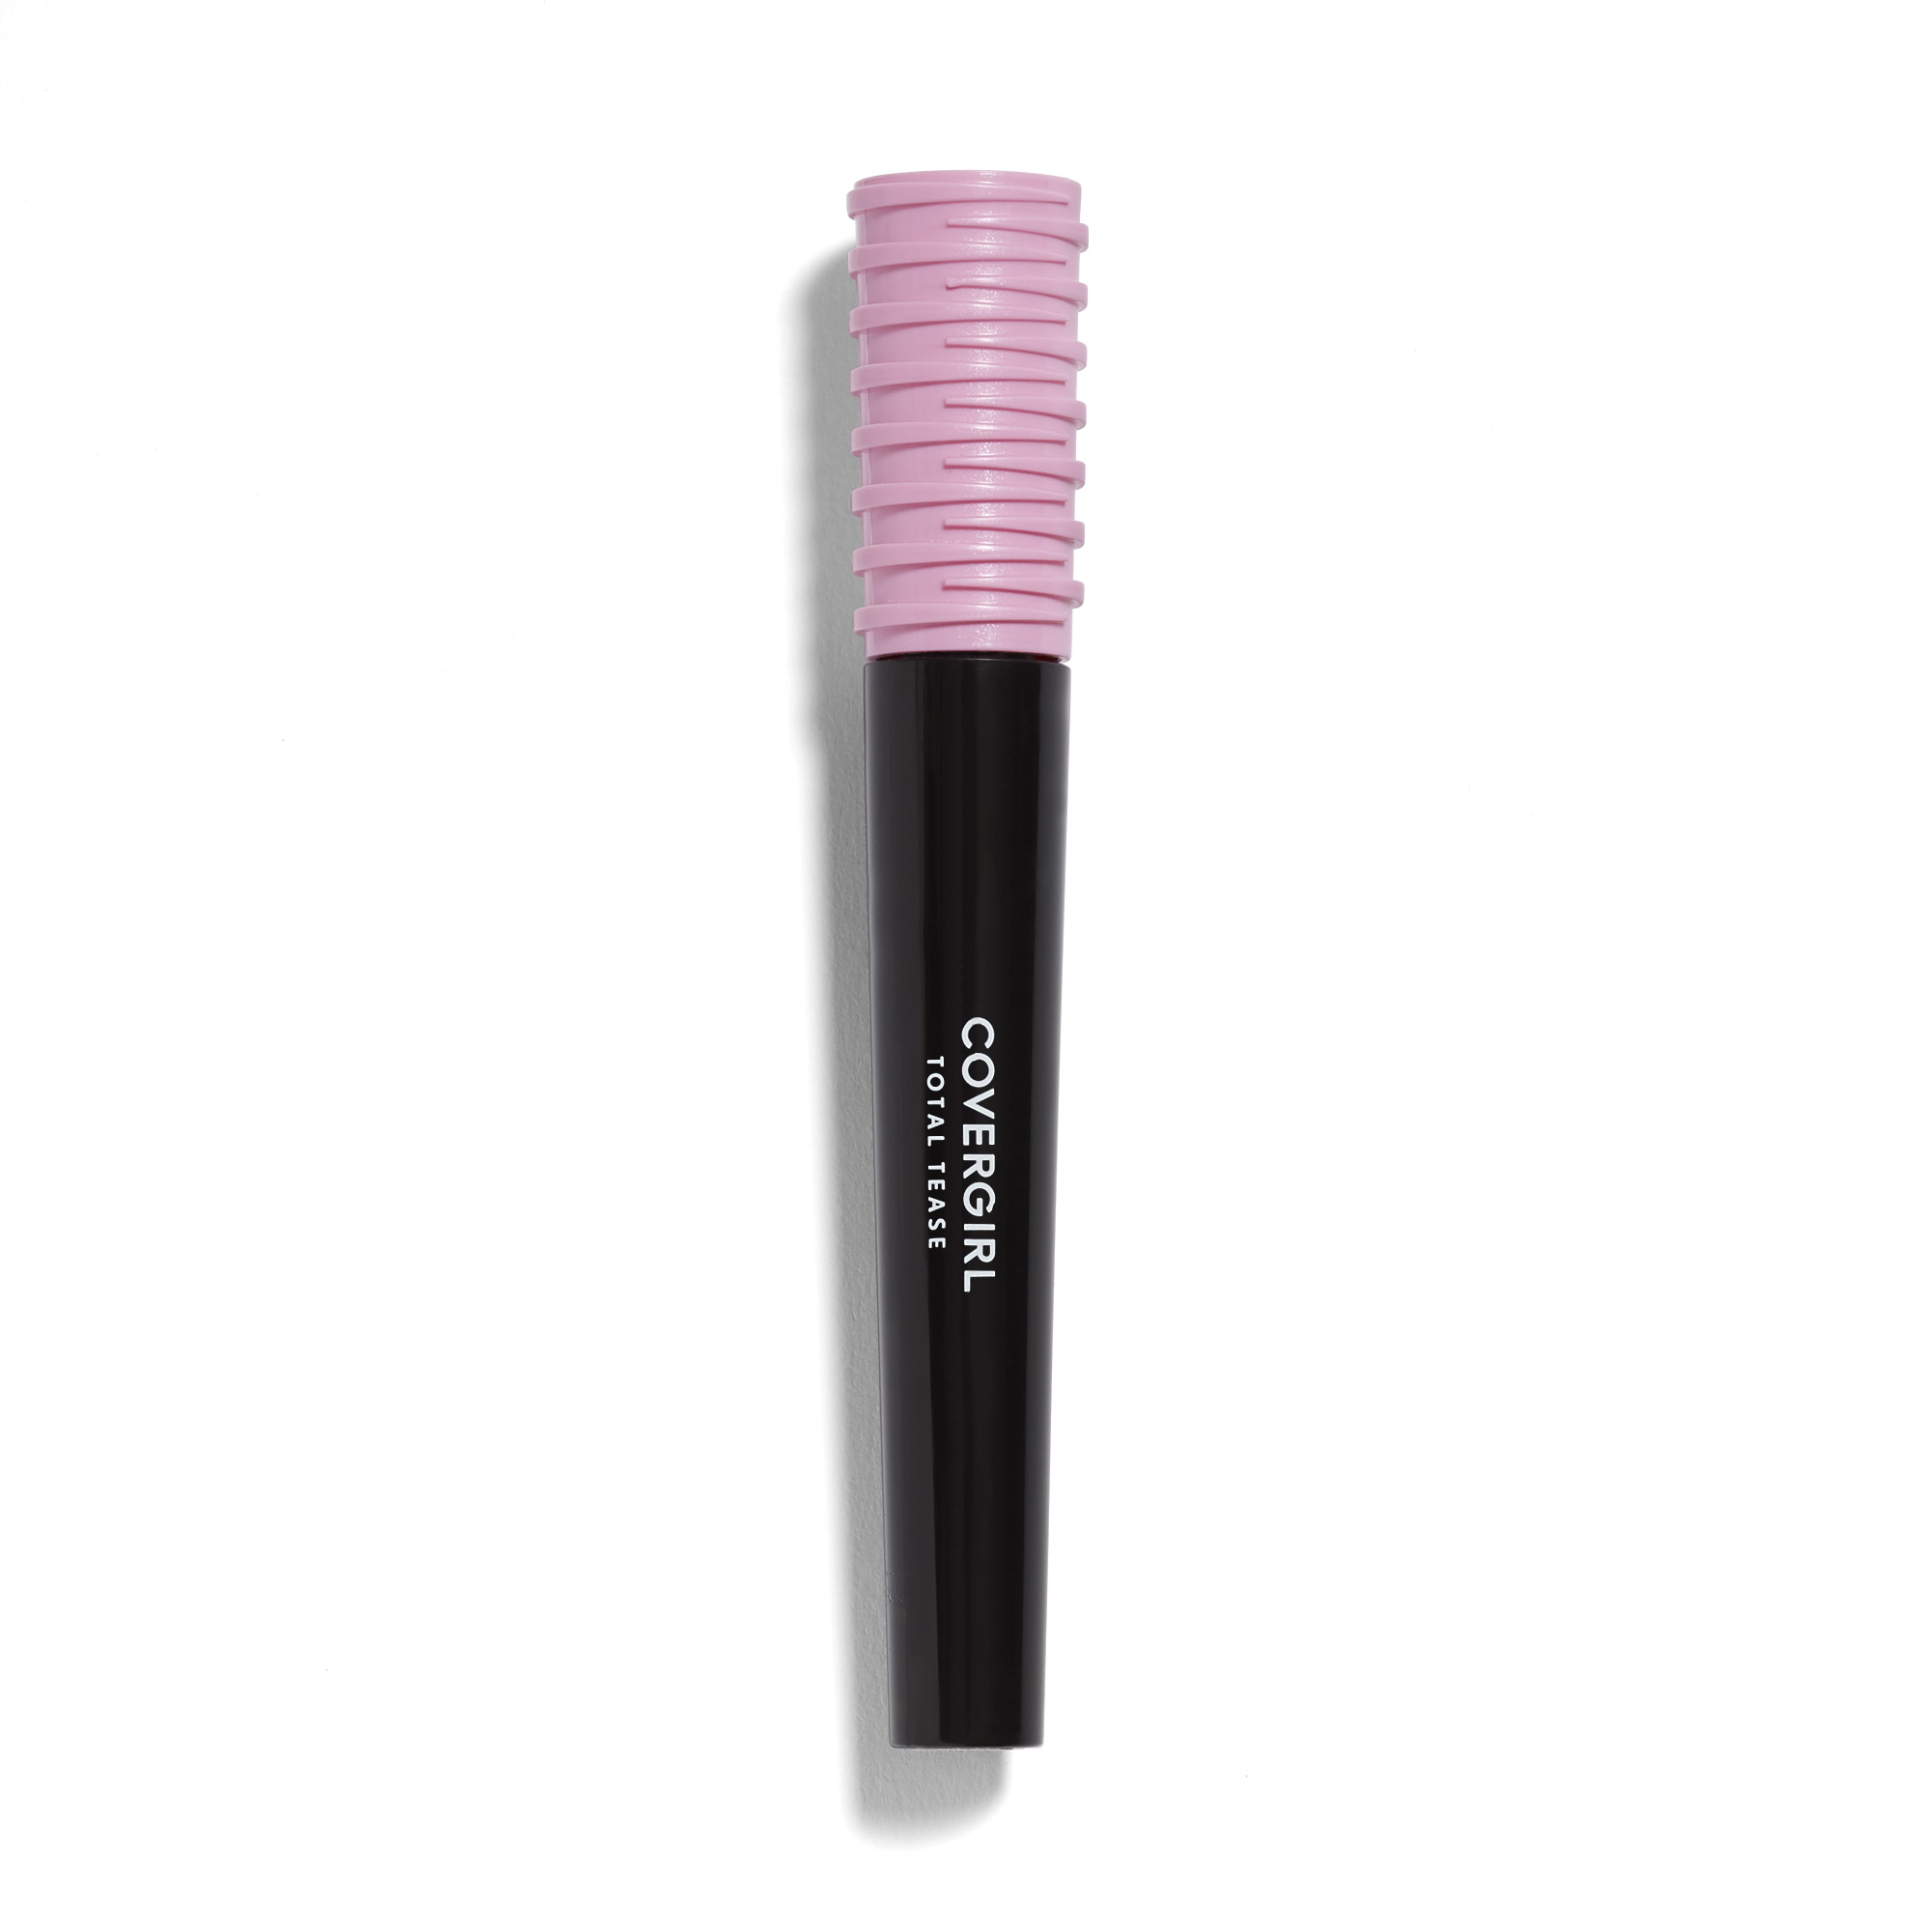 COVERGIRL Total Tease Full + Long + Refined Mascara, 100 Very Black, 0.21 oz - image 4 of 5